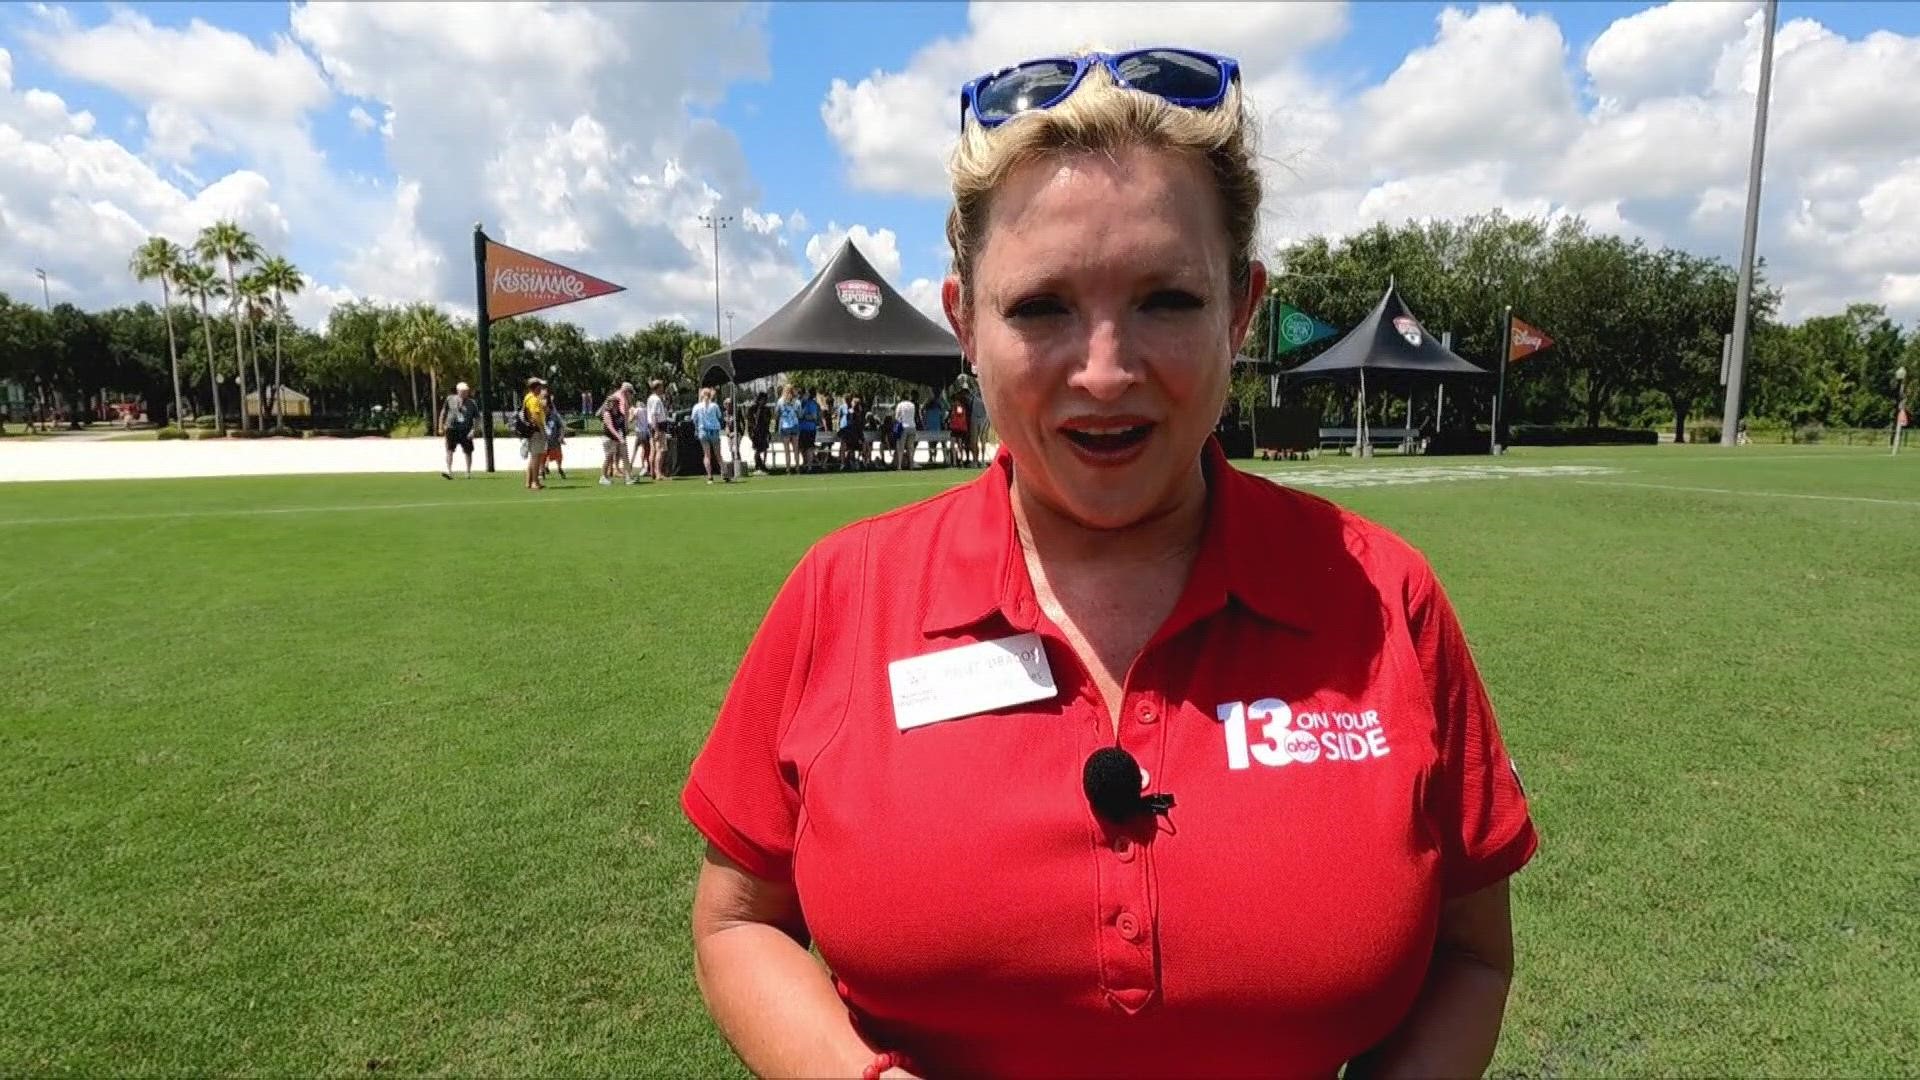 Competition kicked off Monday for Special Olympics Michigan athletes participating in the 2022 Special Olympics USA Games in Orlando, Florida.